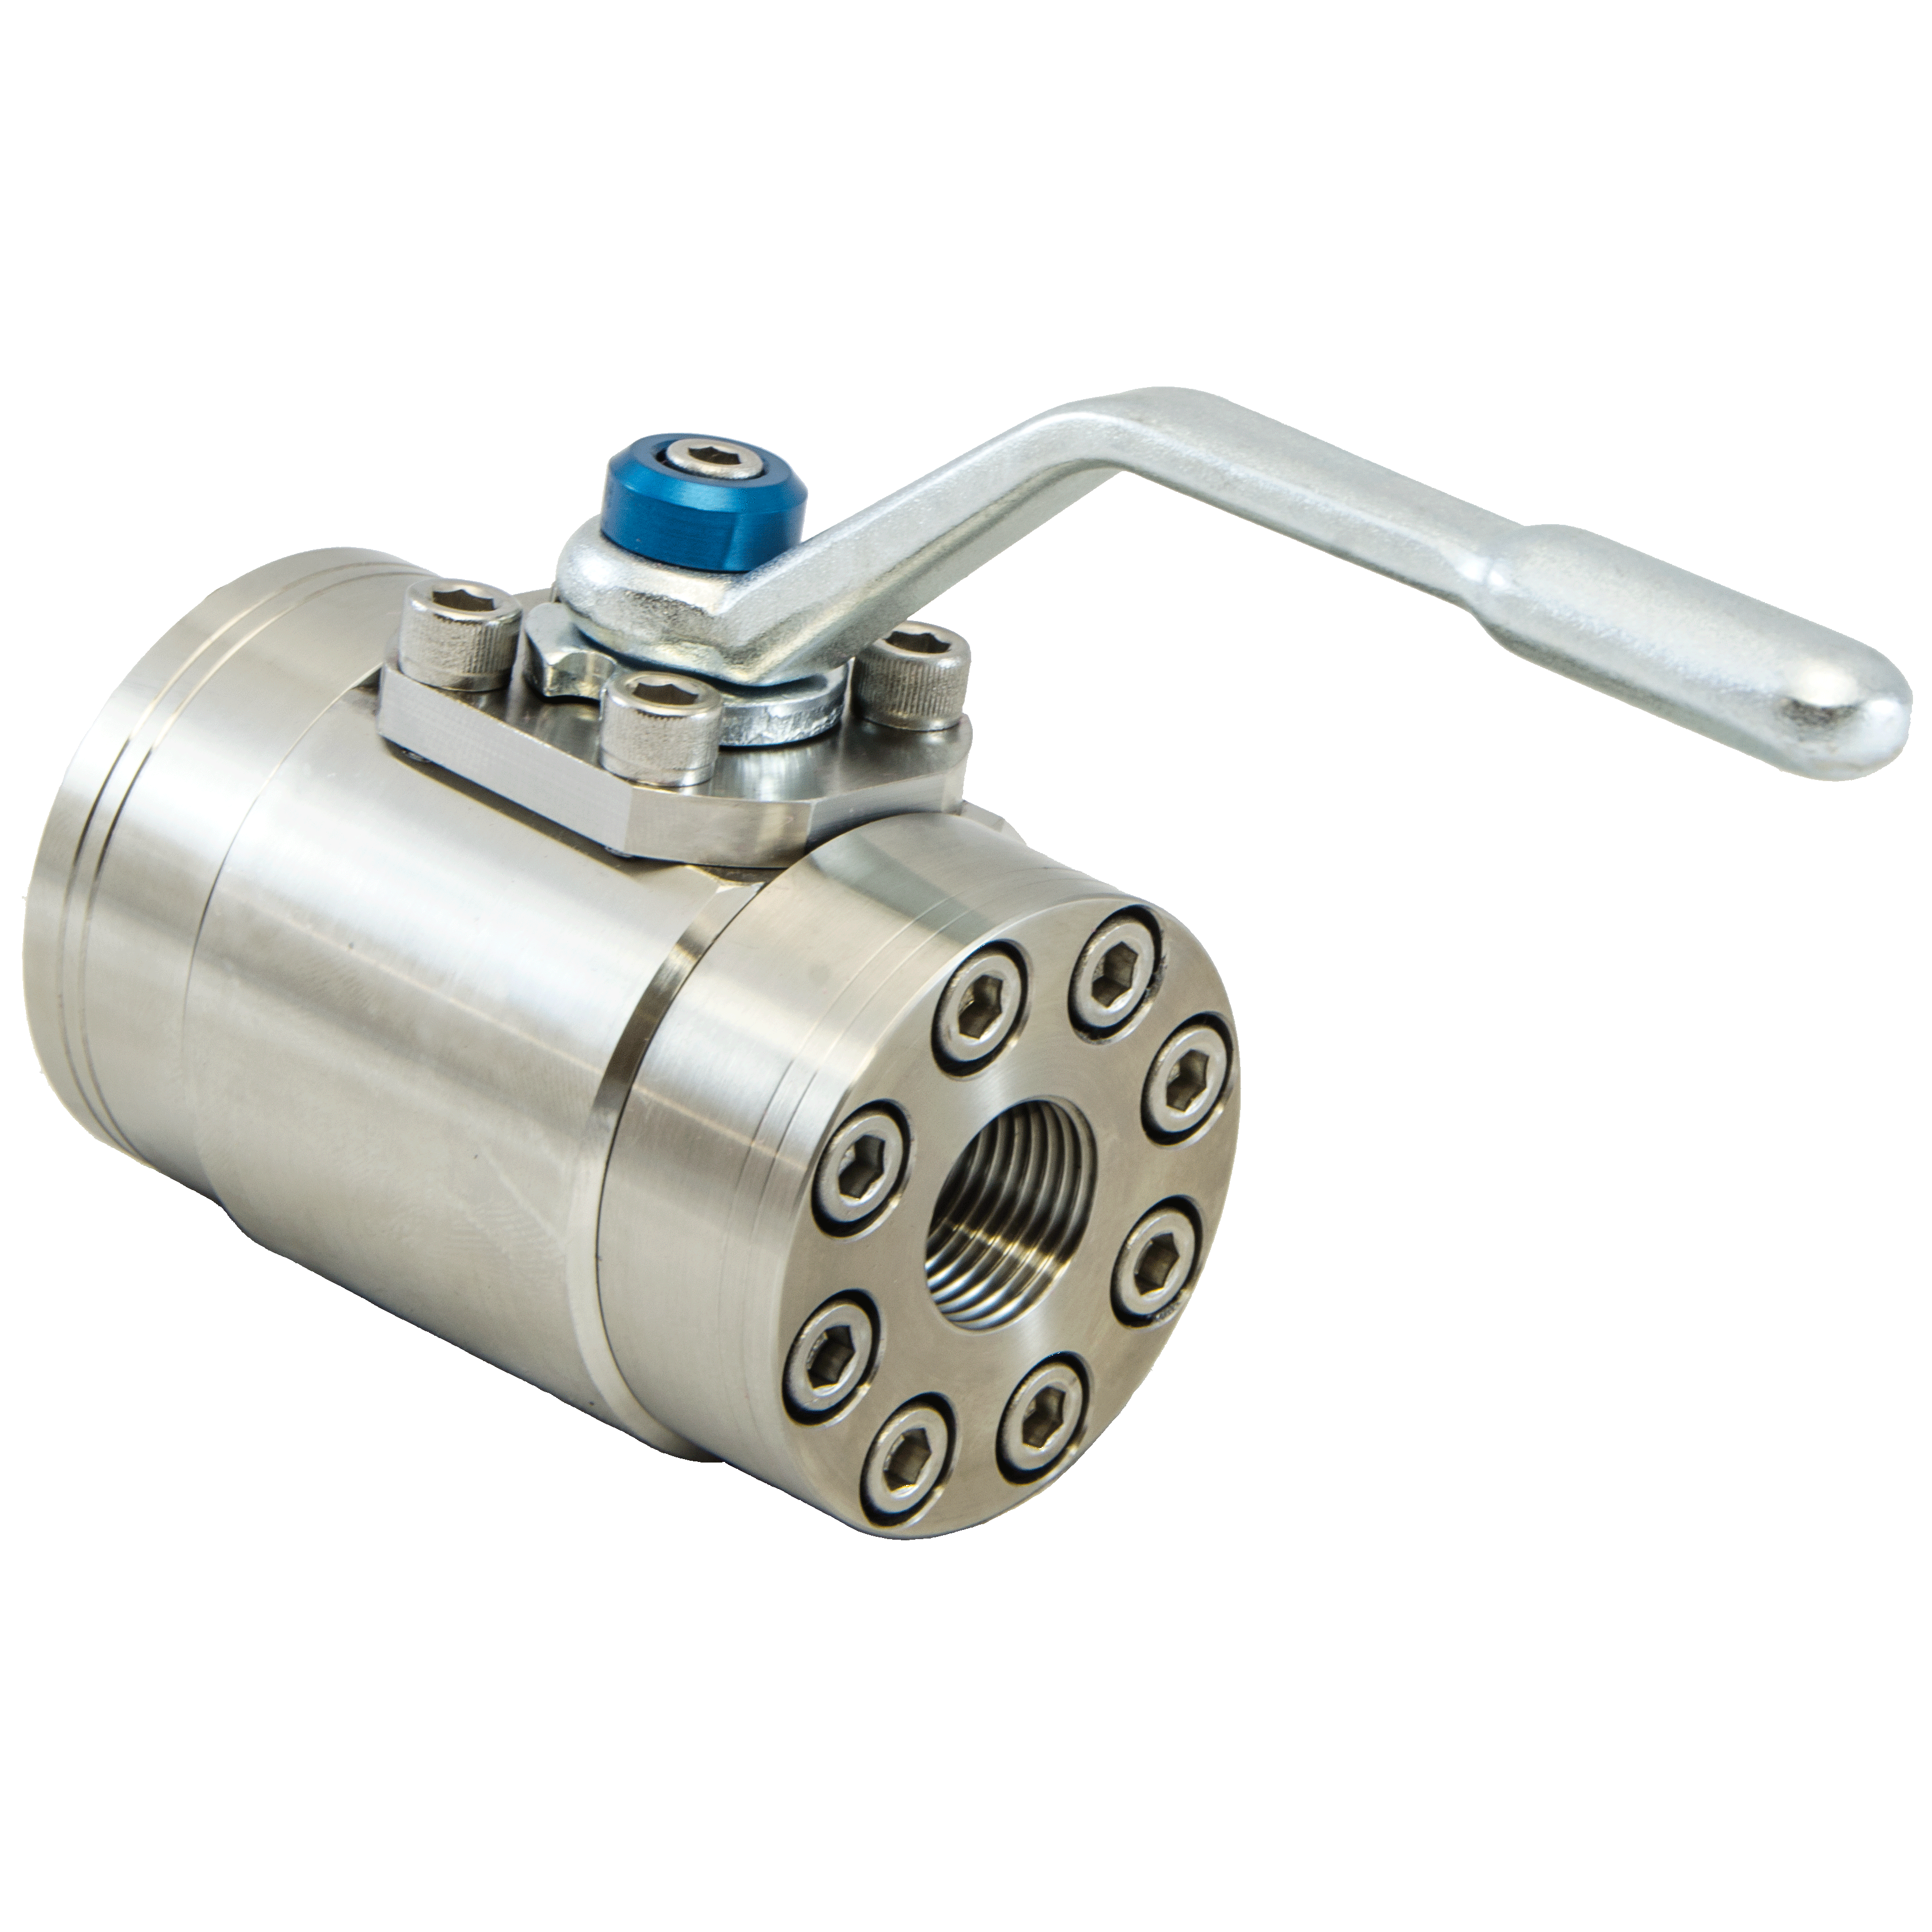 BVQG-1250N-2211 : DMIC Stainless Gas Ball Valve, 1.25 NPT, 316 Stainless Steel, 6000psi, Two-Way